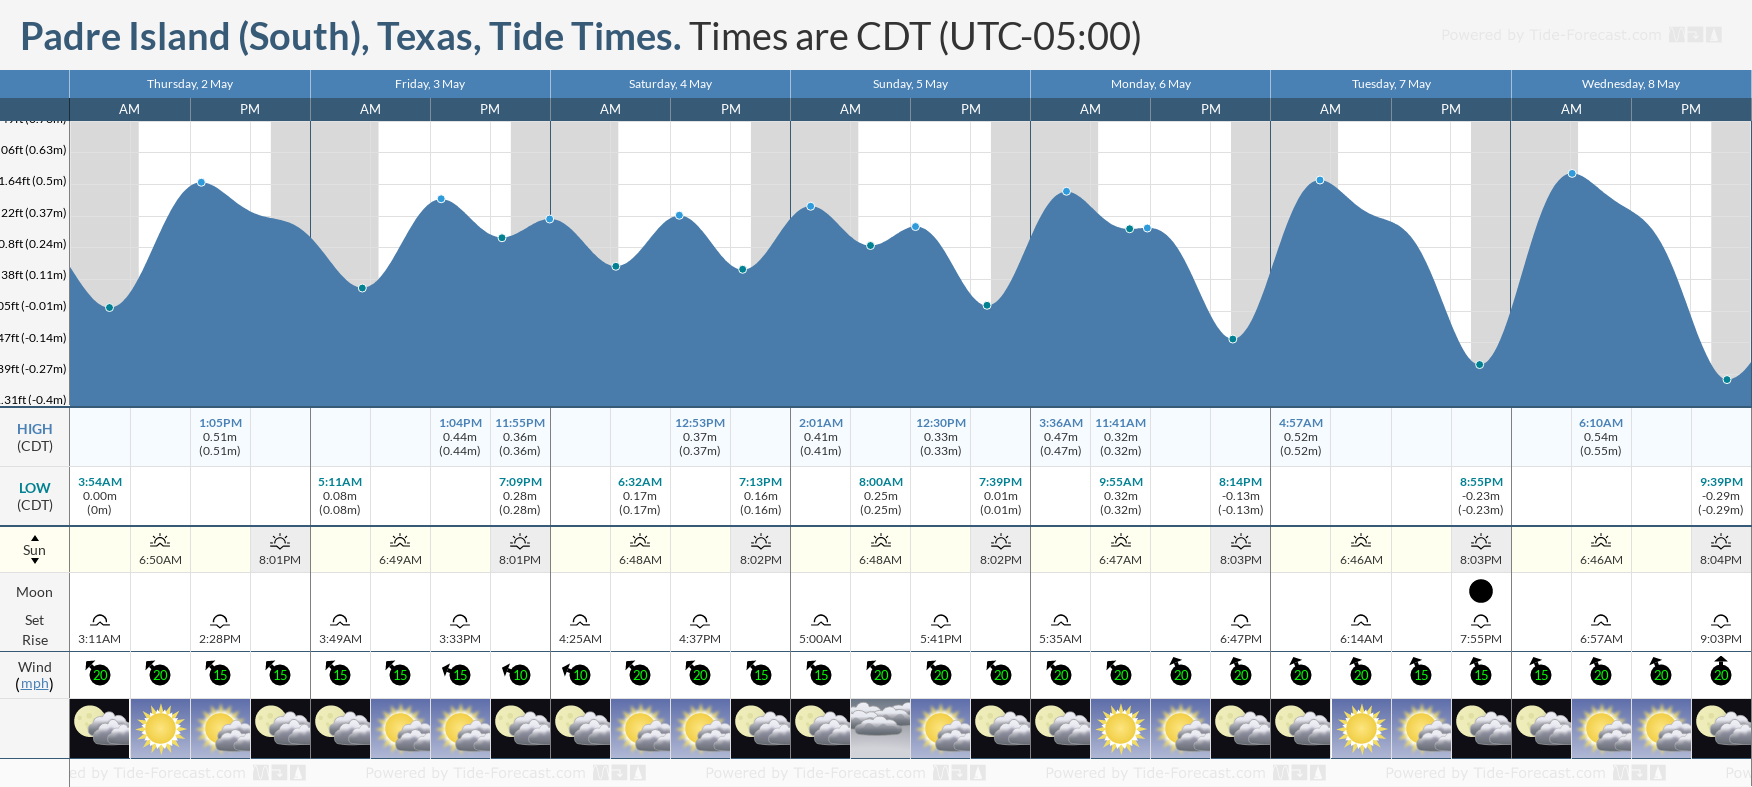 Padre Island (South), Texas Tide Chart including high and low tide times for the next 7 days